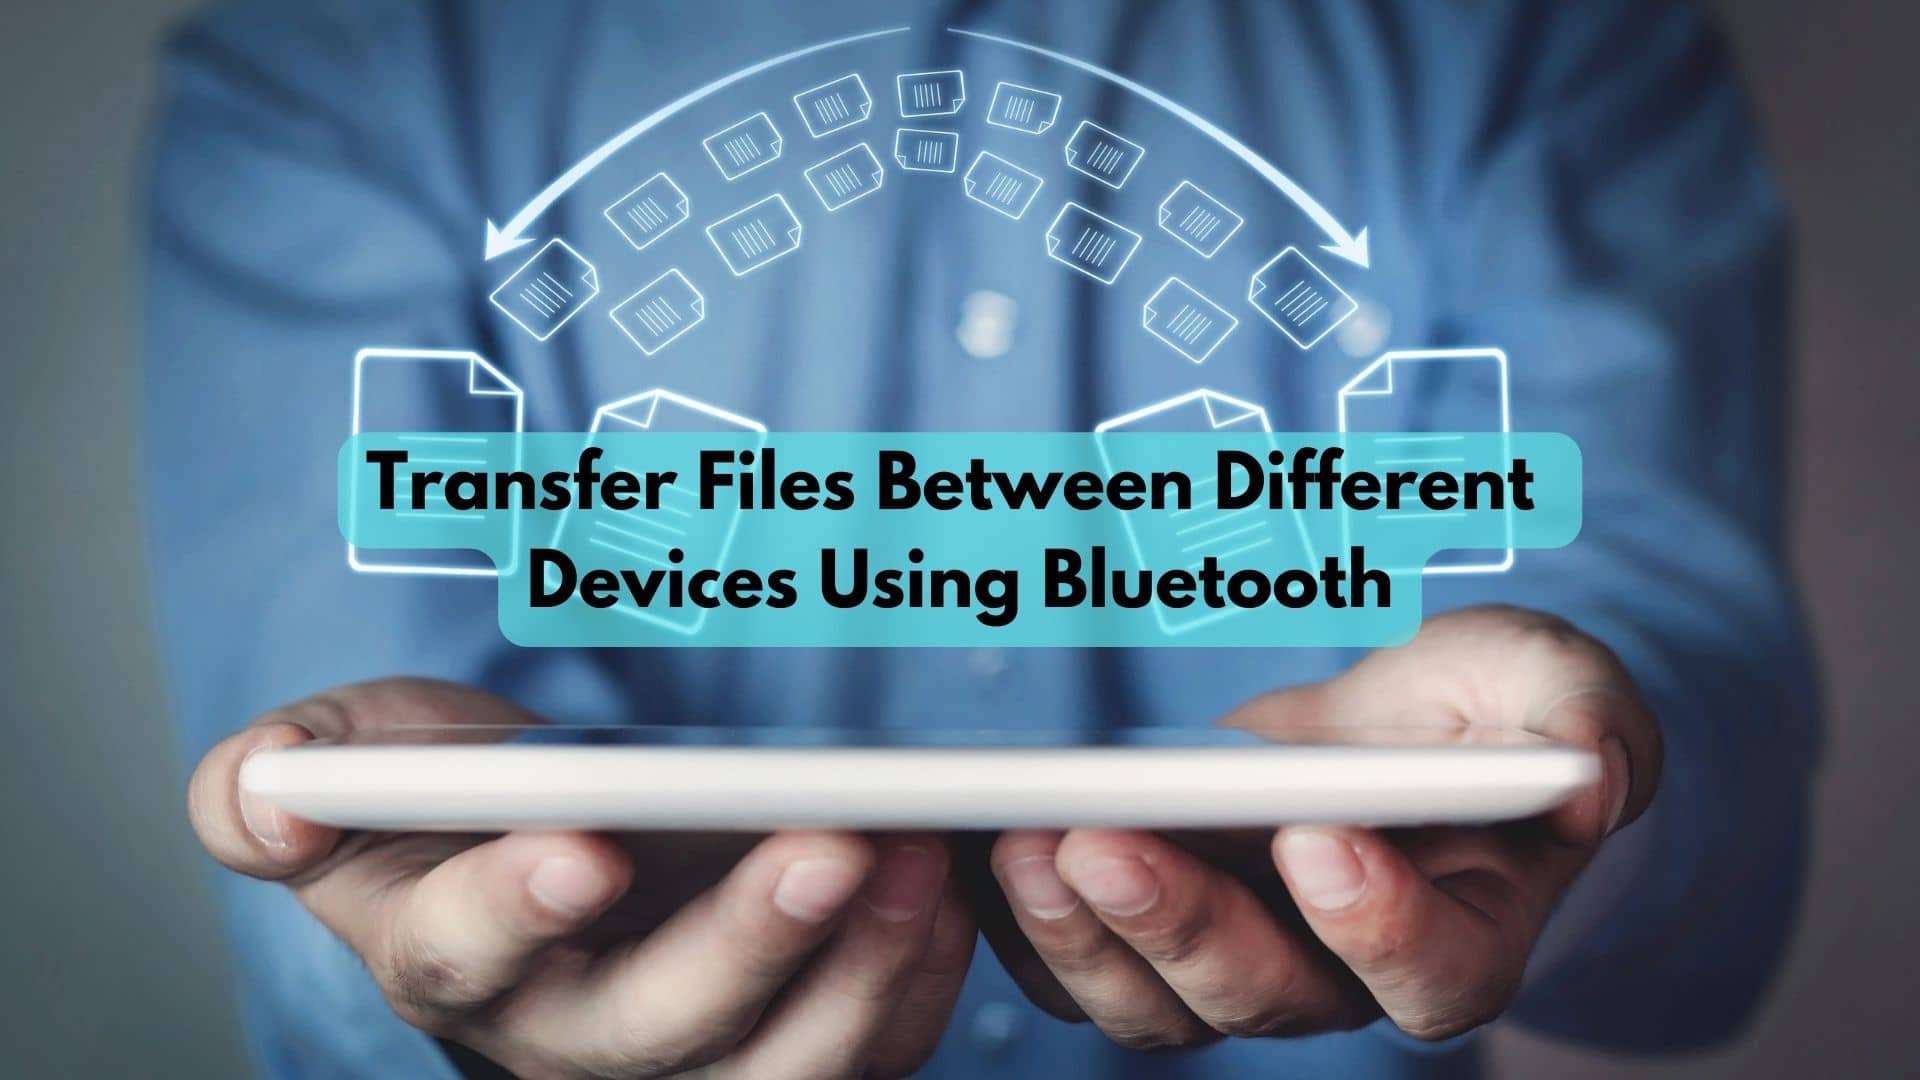 How To Transfer Files Between Different Devices Using Bluetooth?